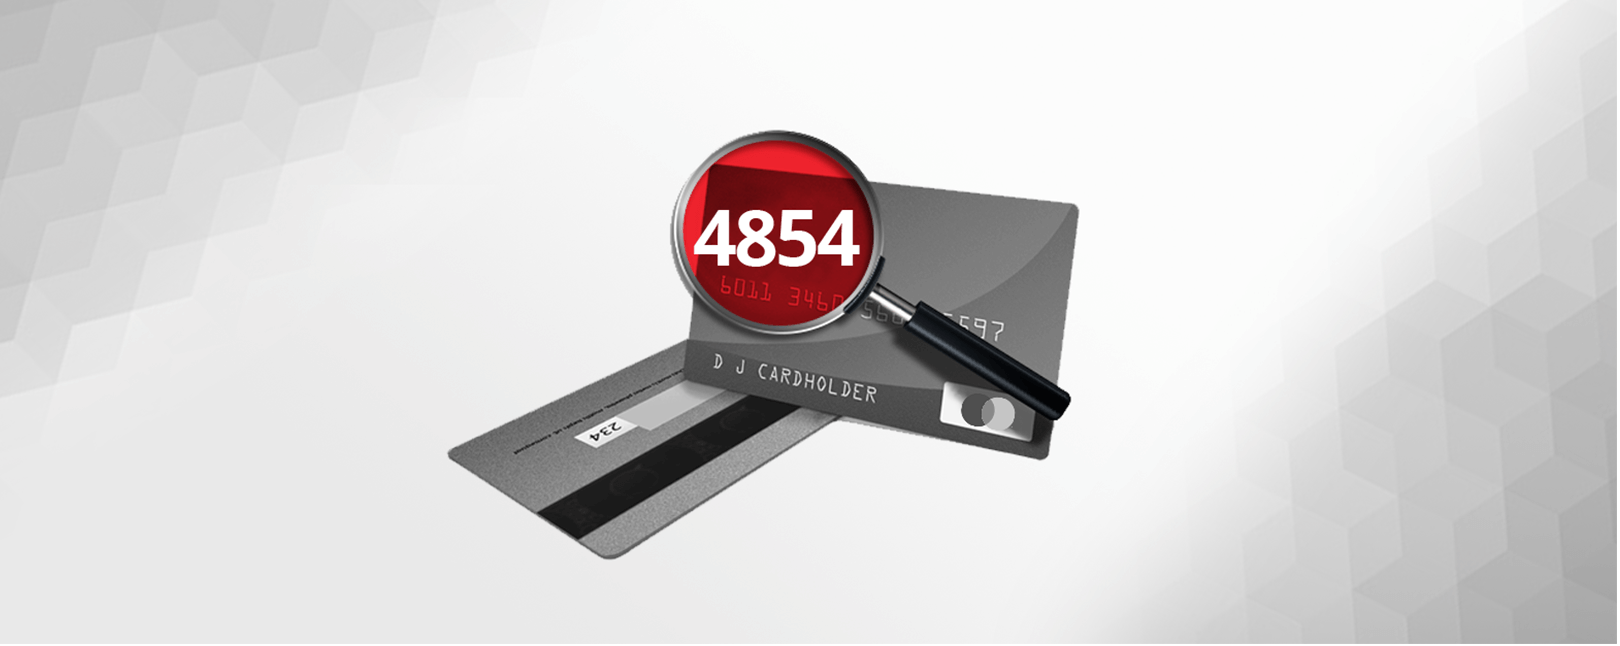 4854- Cardholder Dispute Not Elsewhere Classified (US Only)